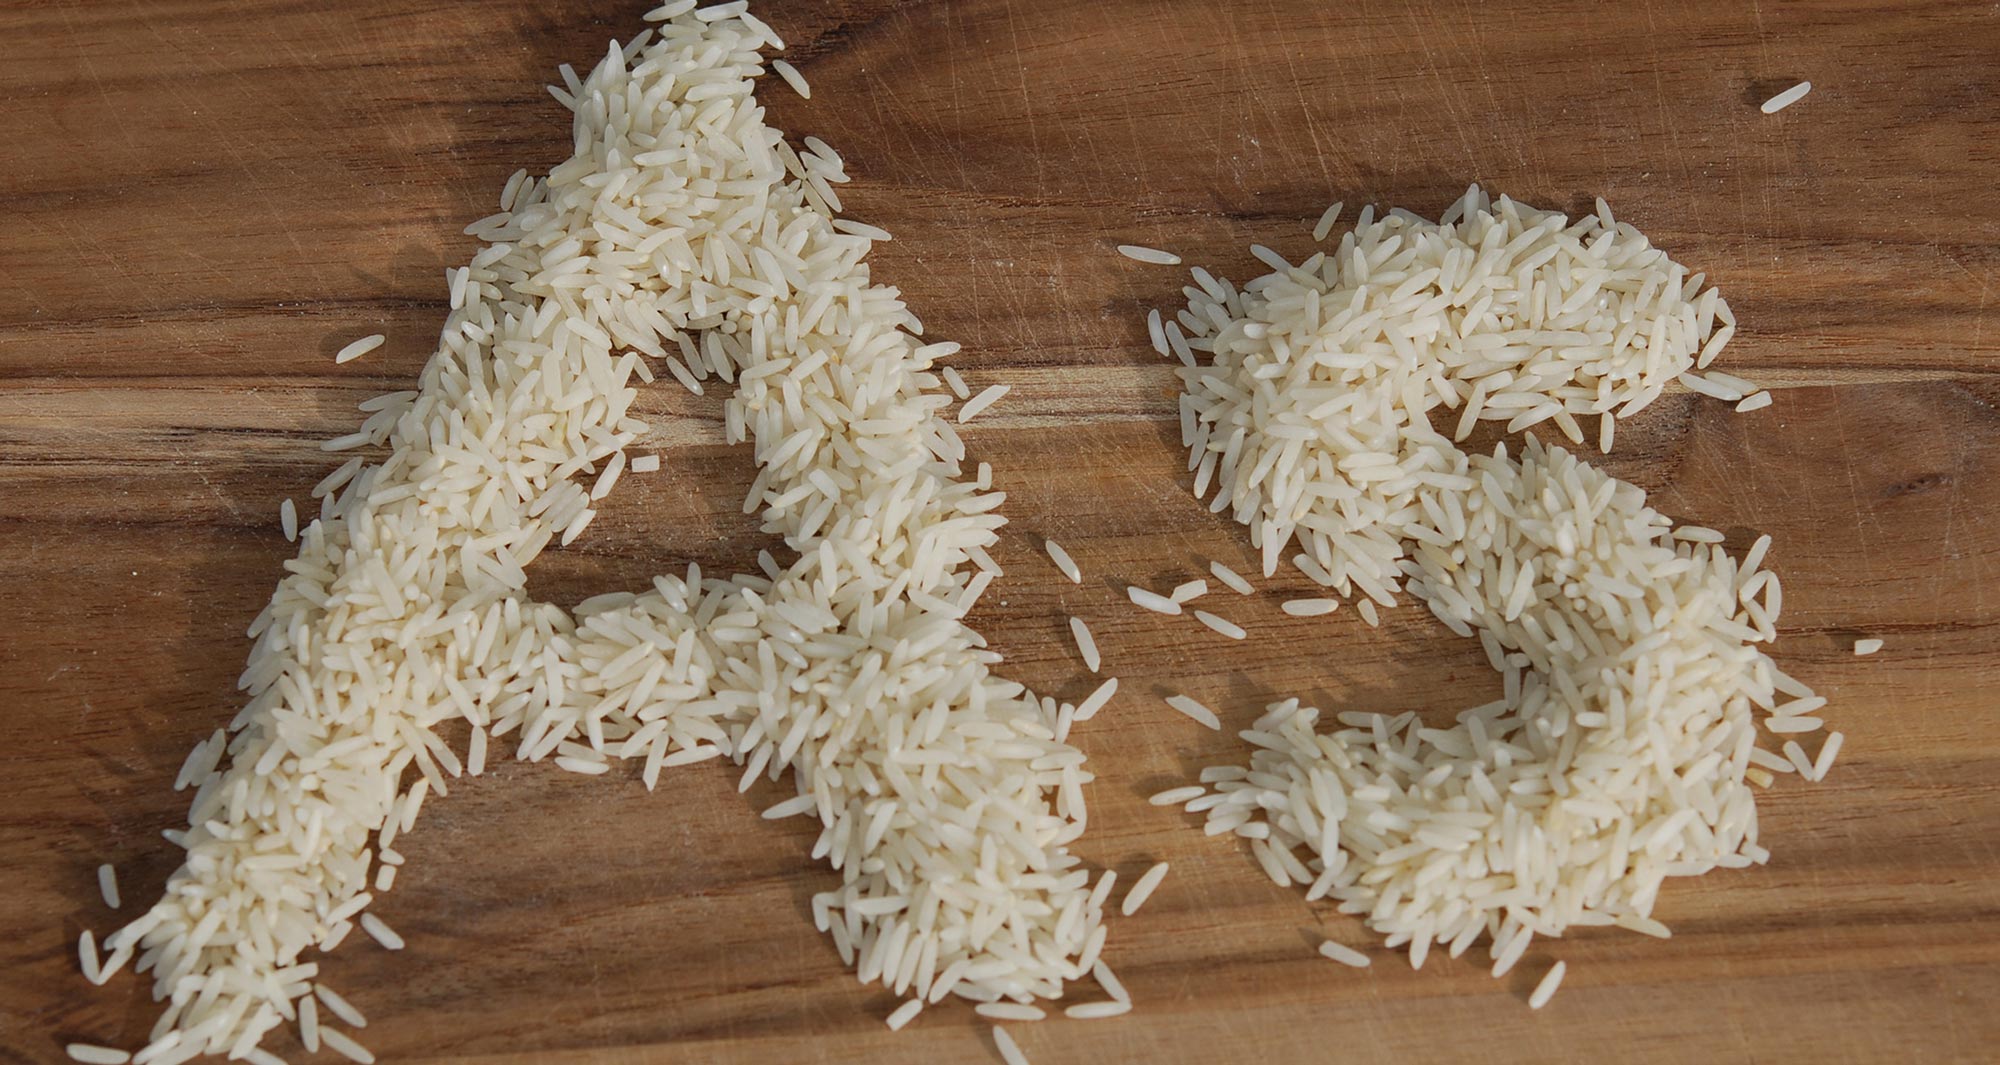 rice in shape of the letters "As"